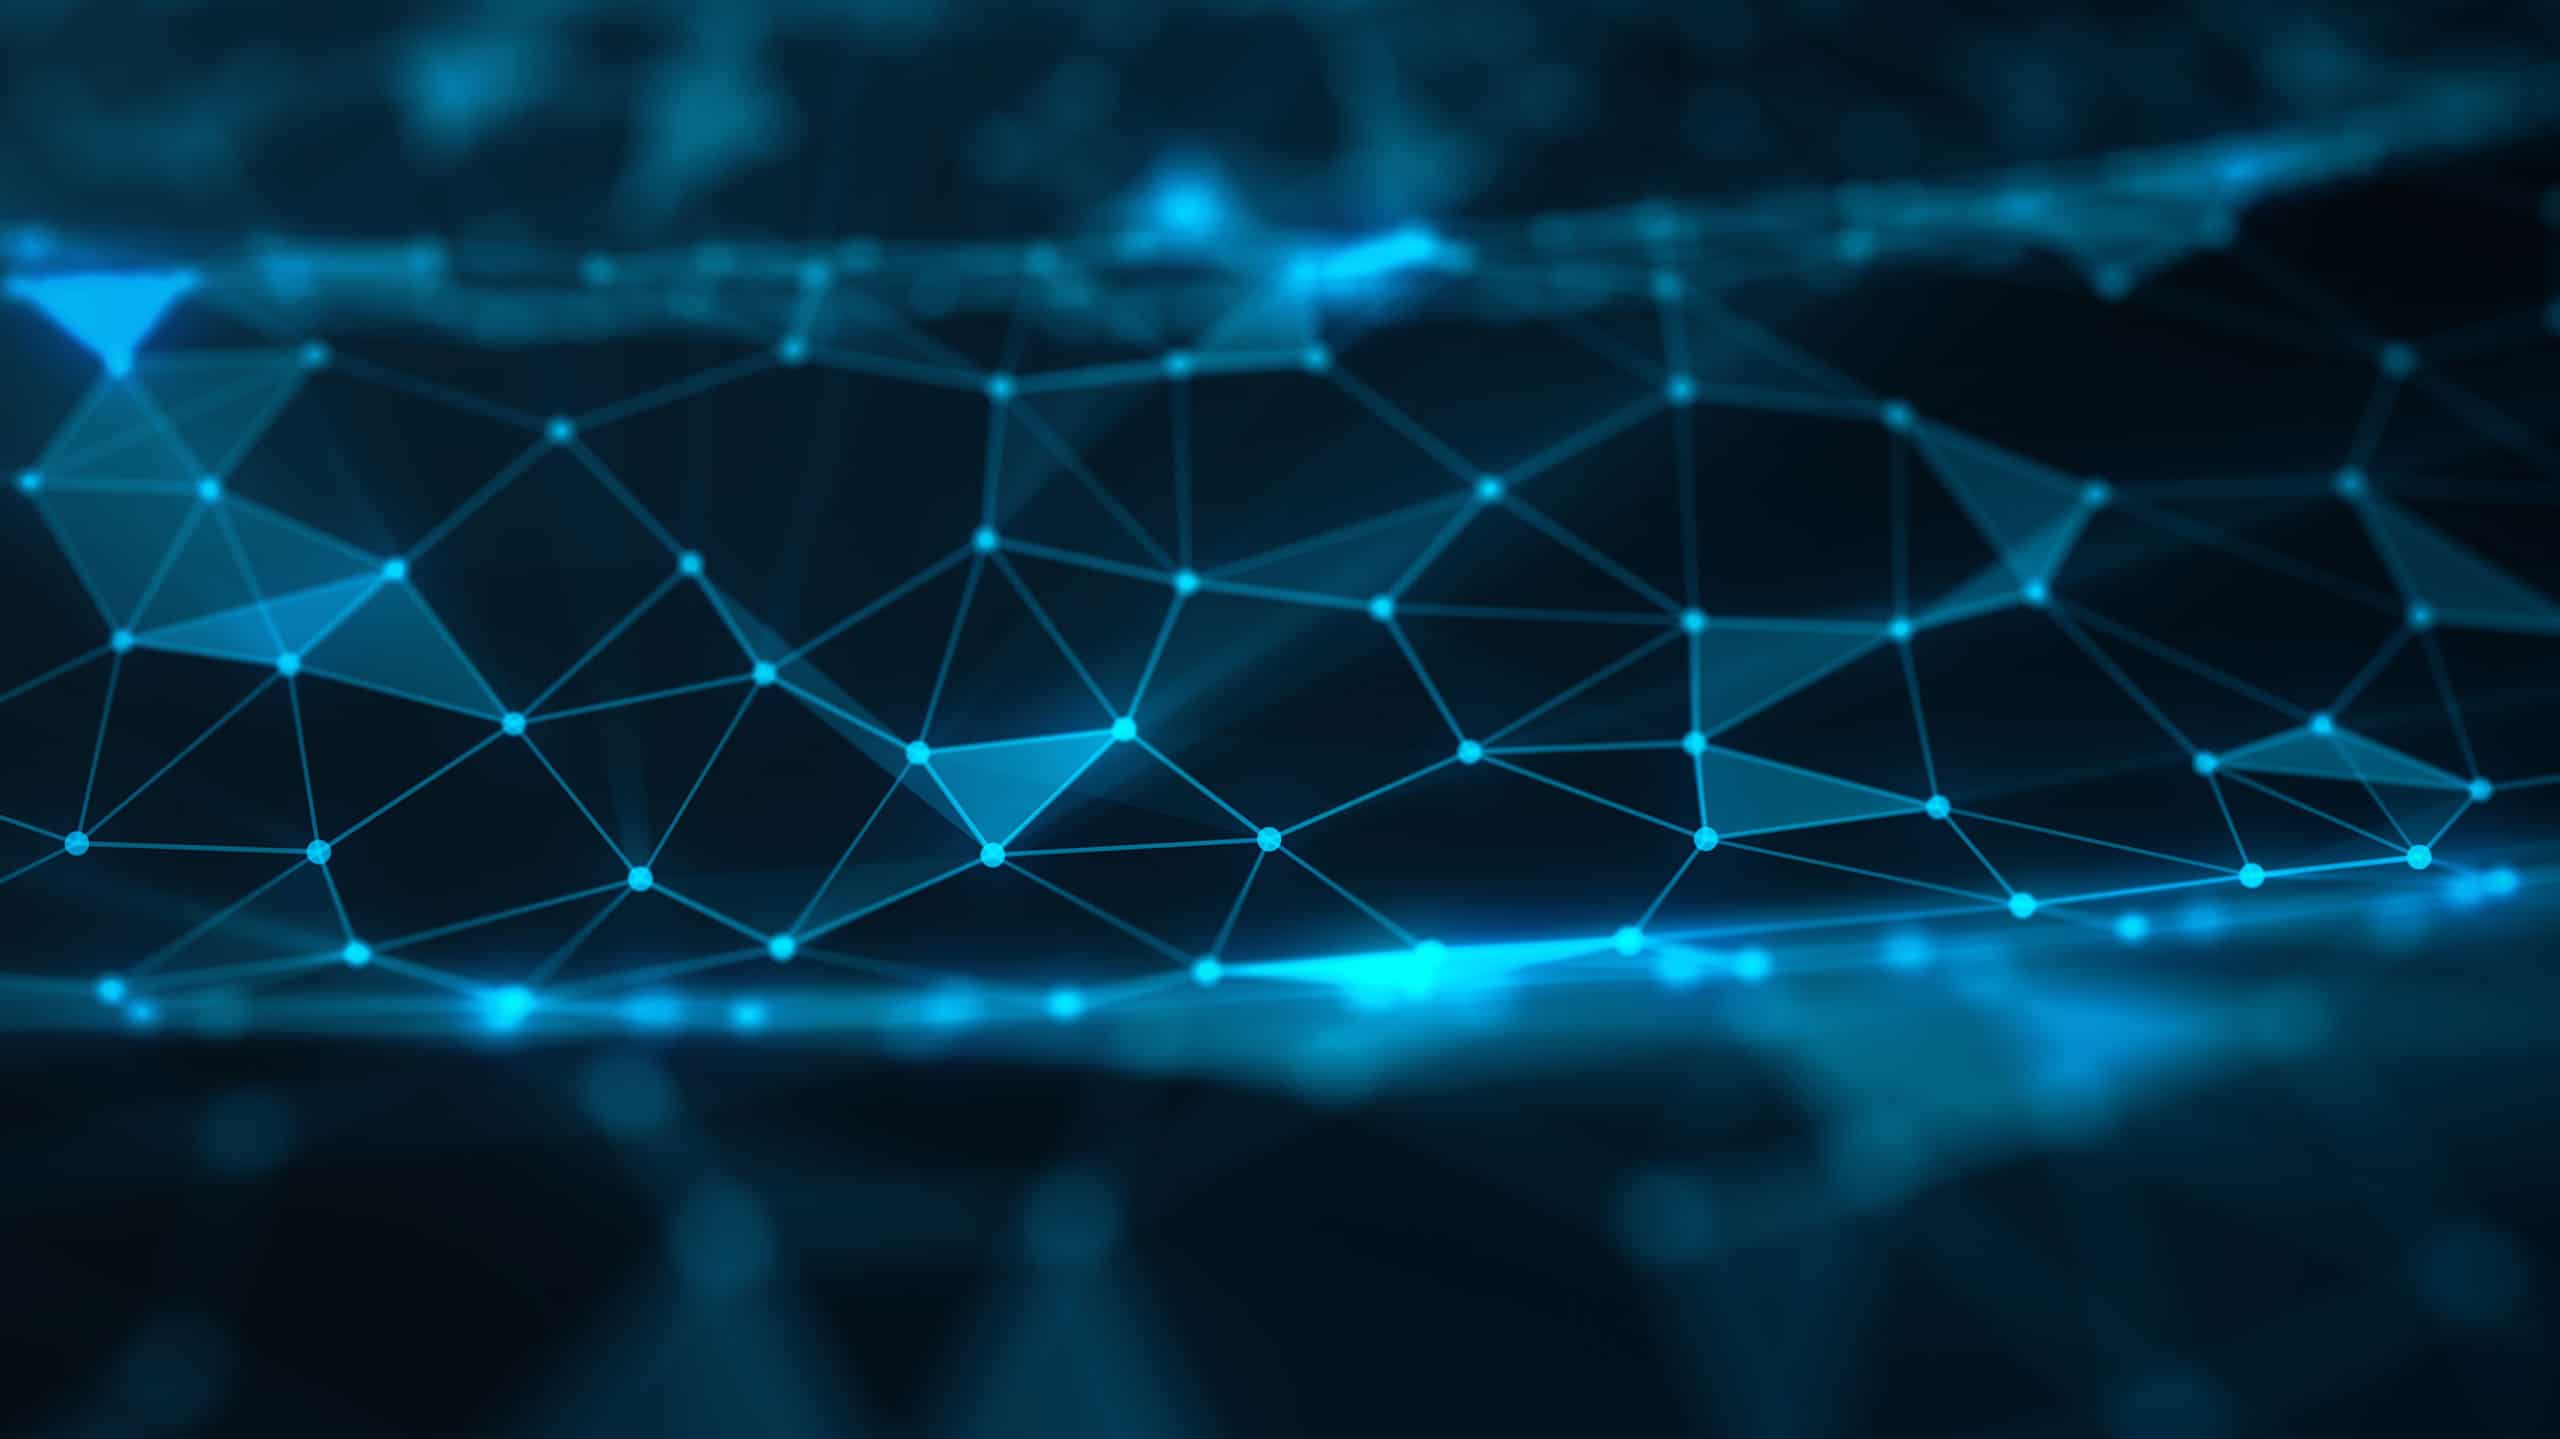 Abstract digital background with blue glowing interconnected nodes and lines on a dark background, symbolizing a network or data connections.